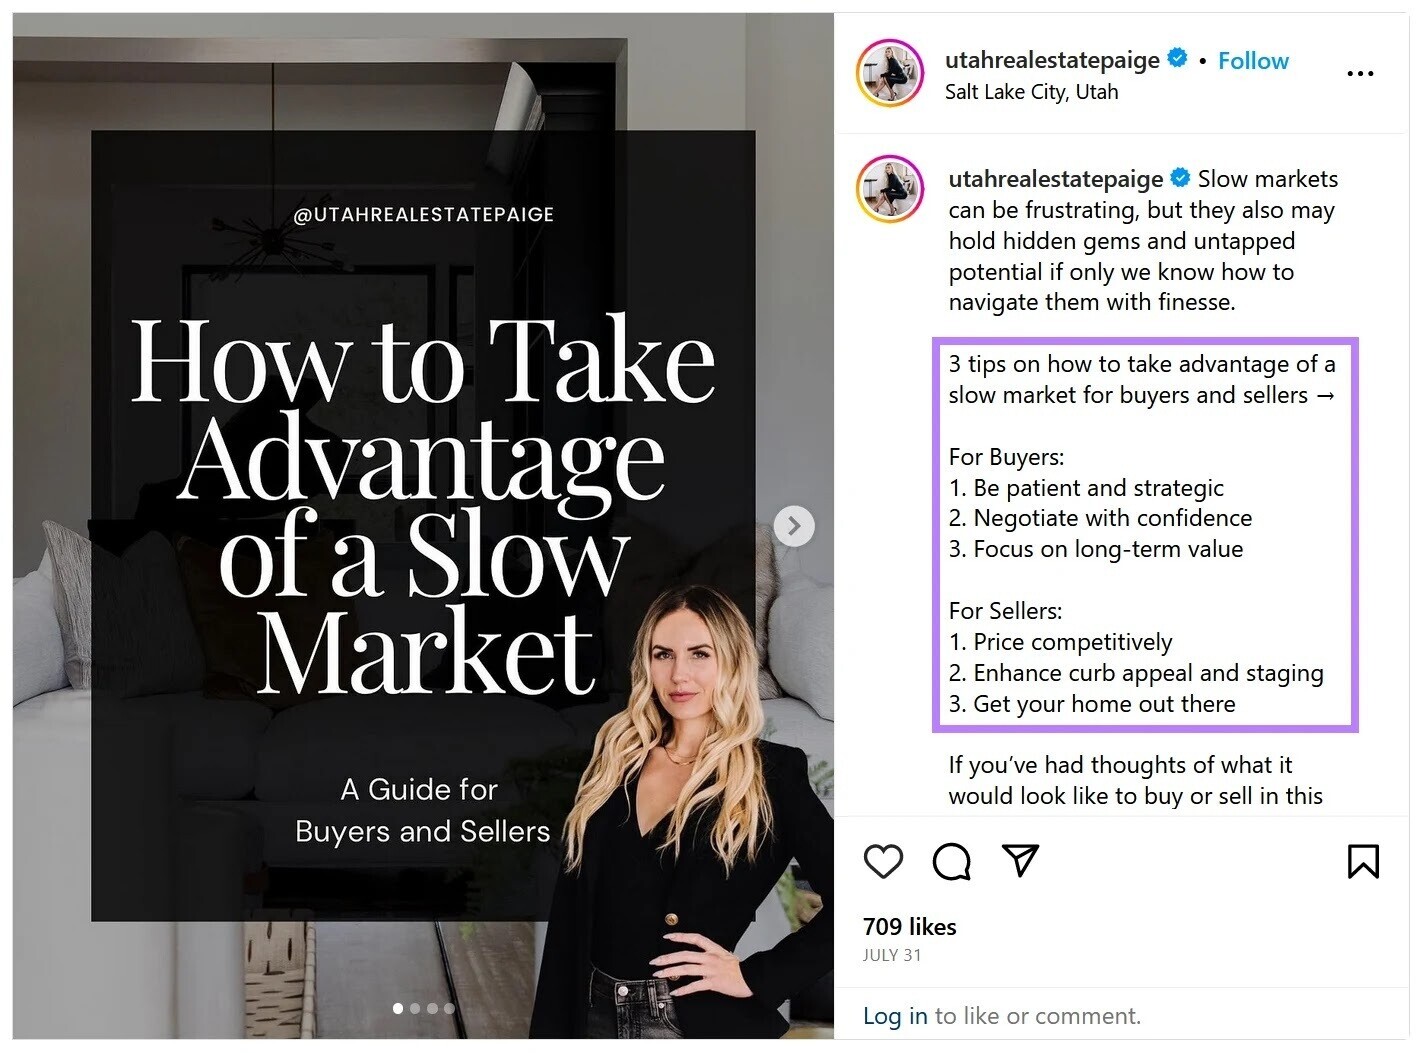 An example of an educational real estate social media post